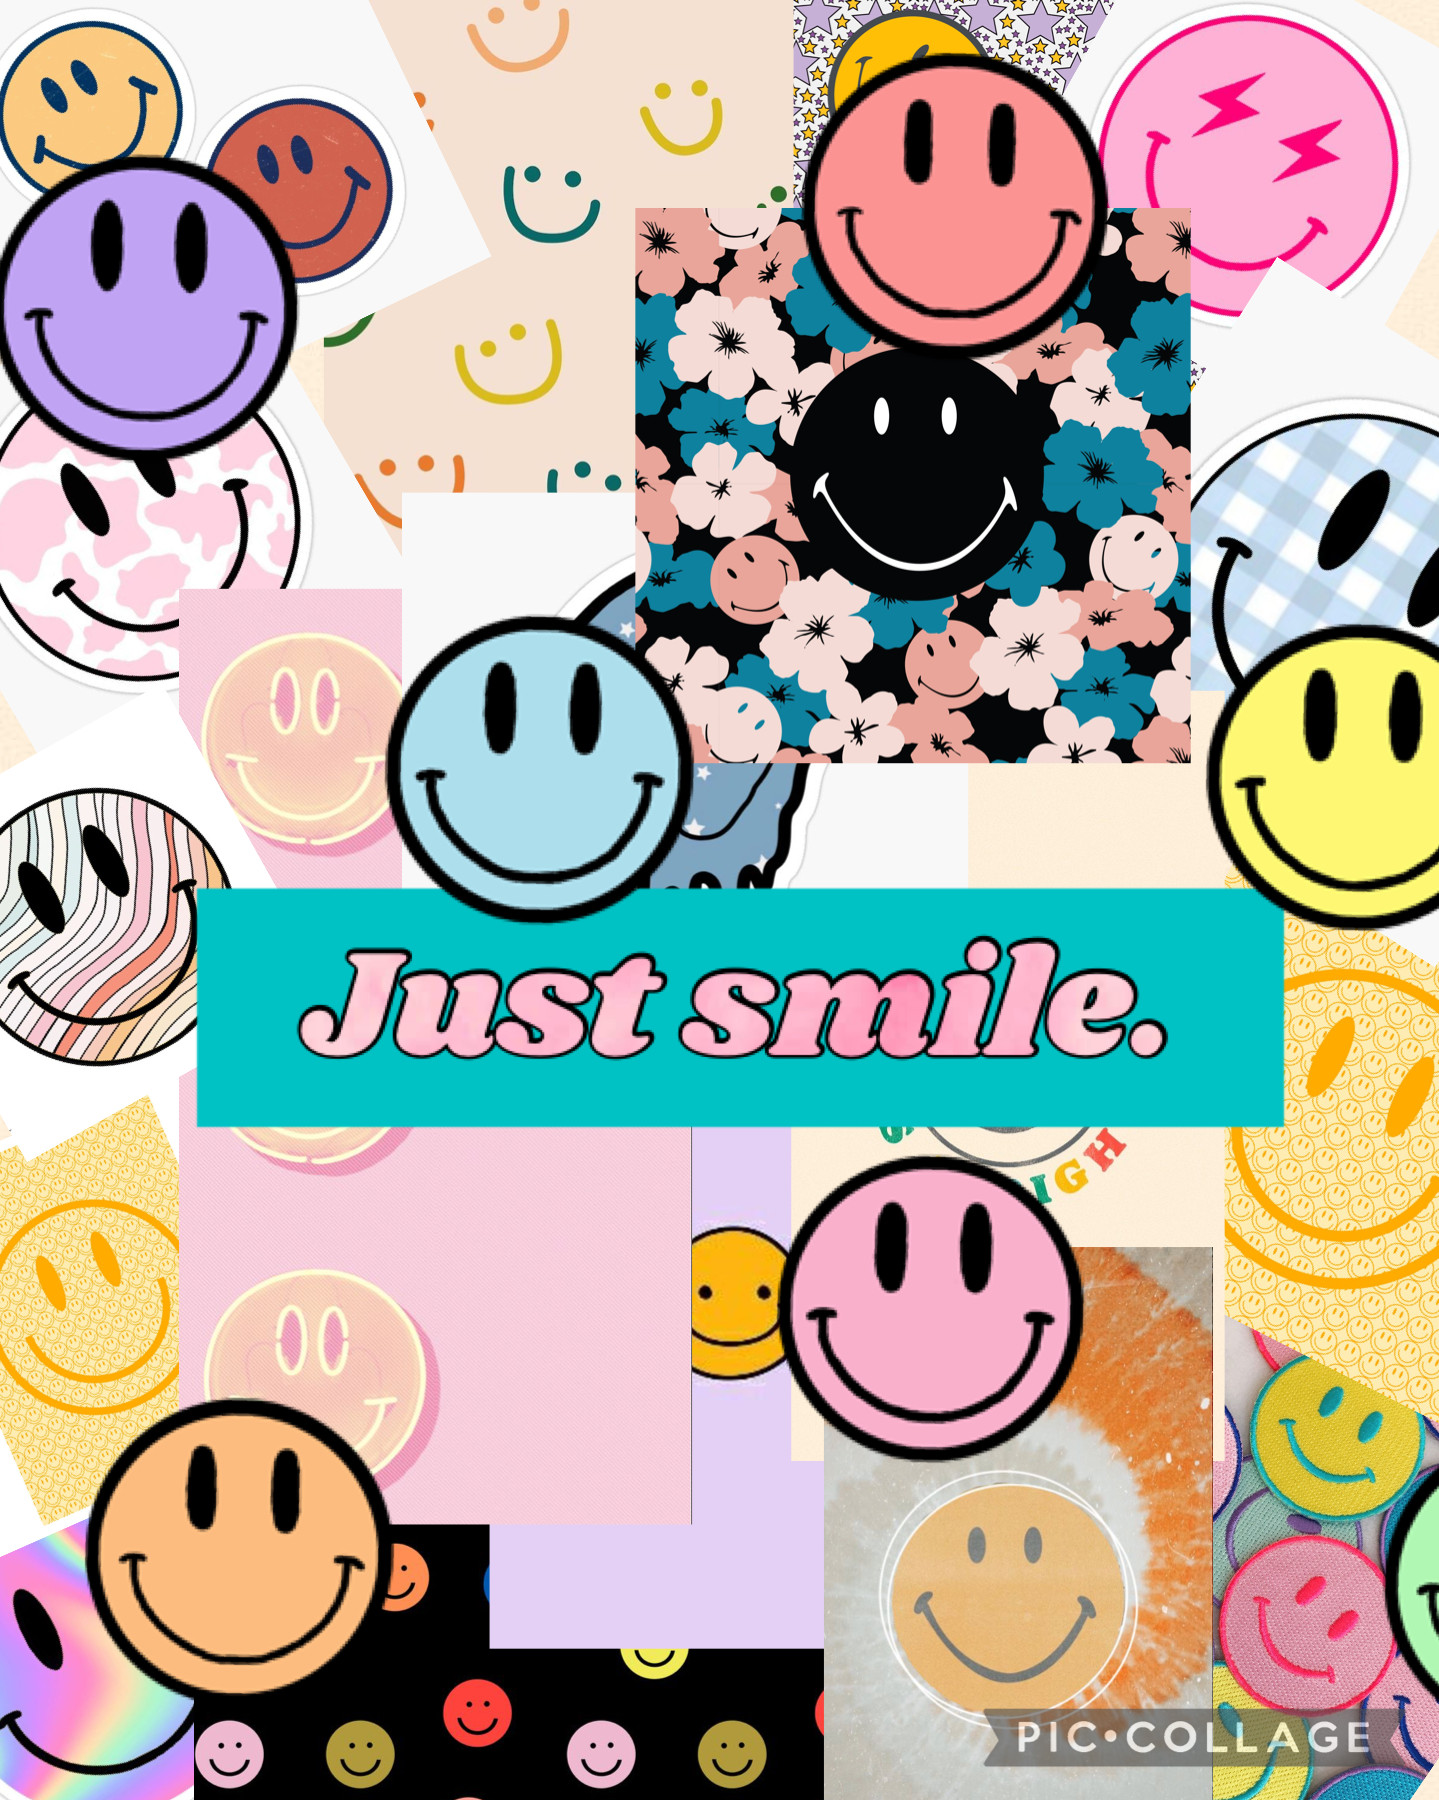 Just smile 😊 :) ;) :D 